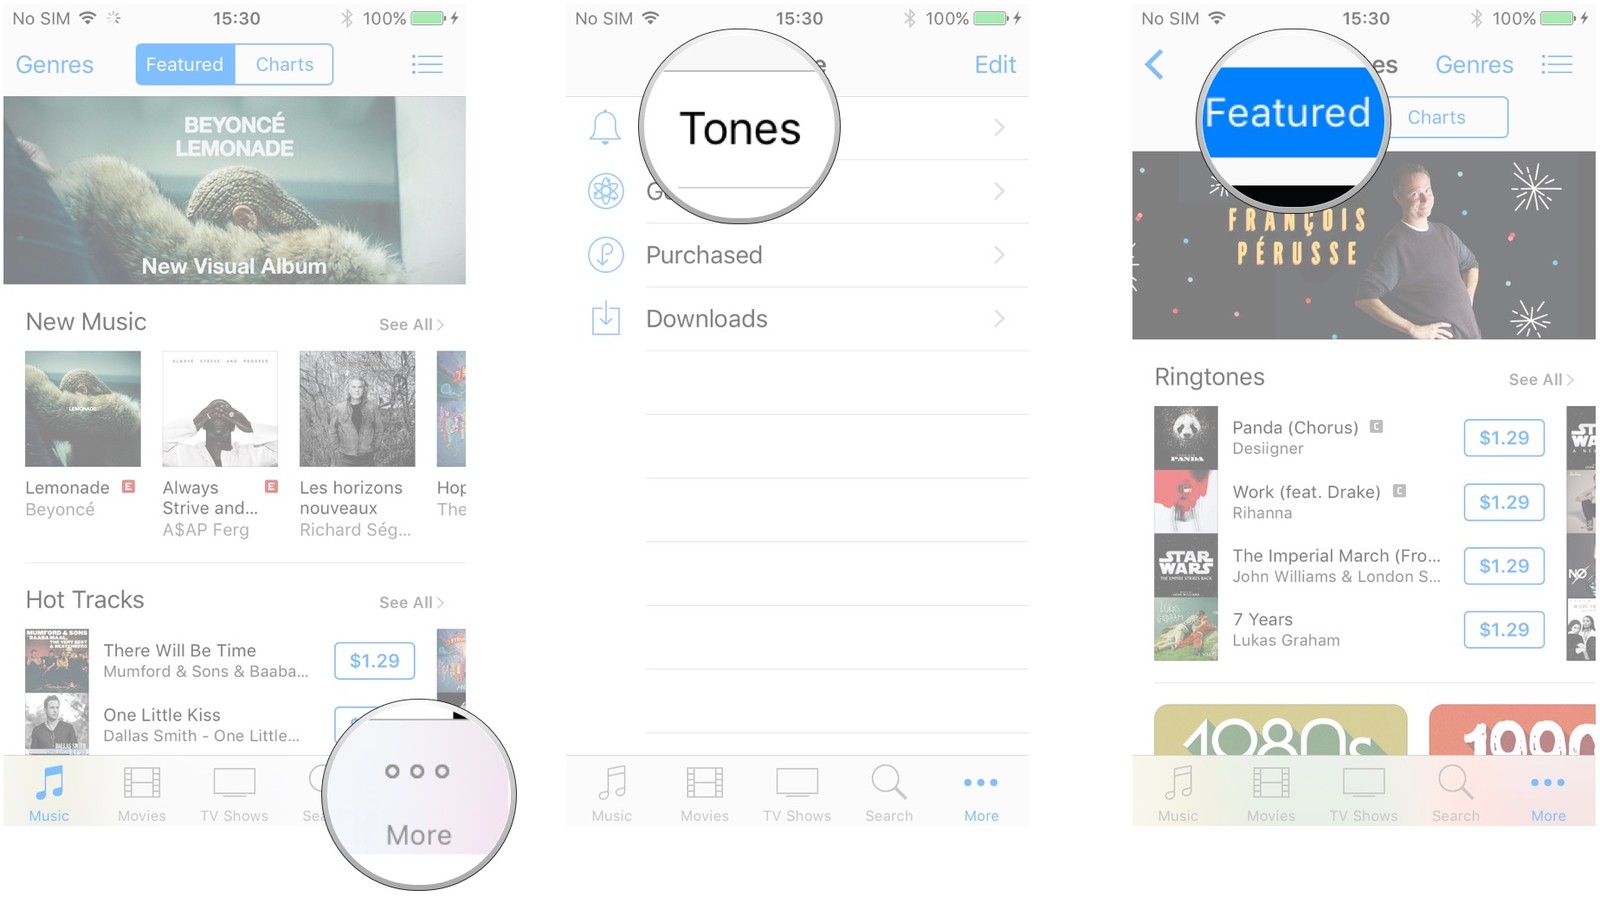 Download Tones From Itunes To Mac